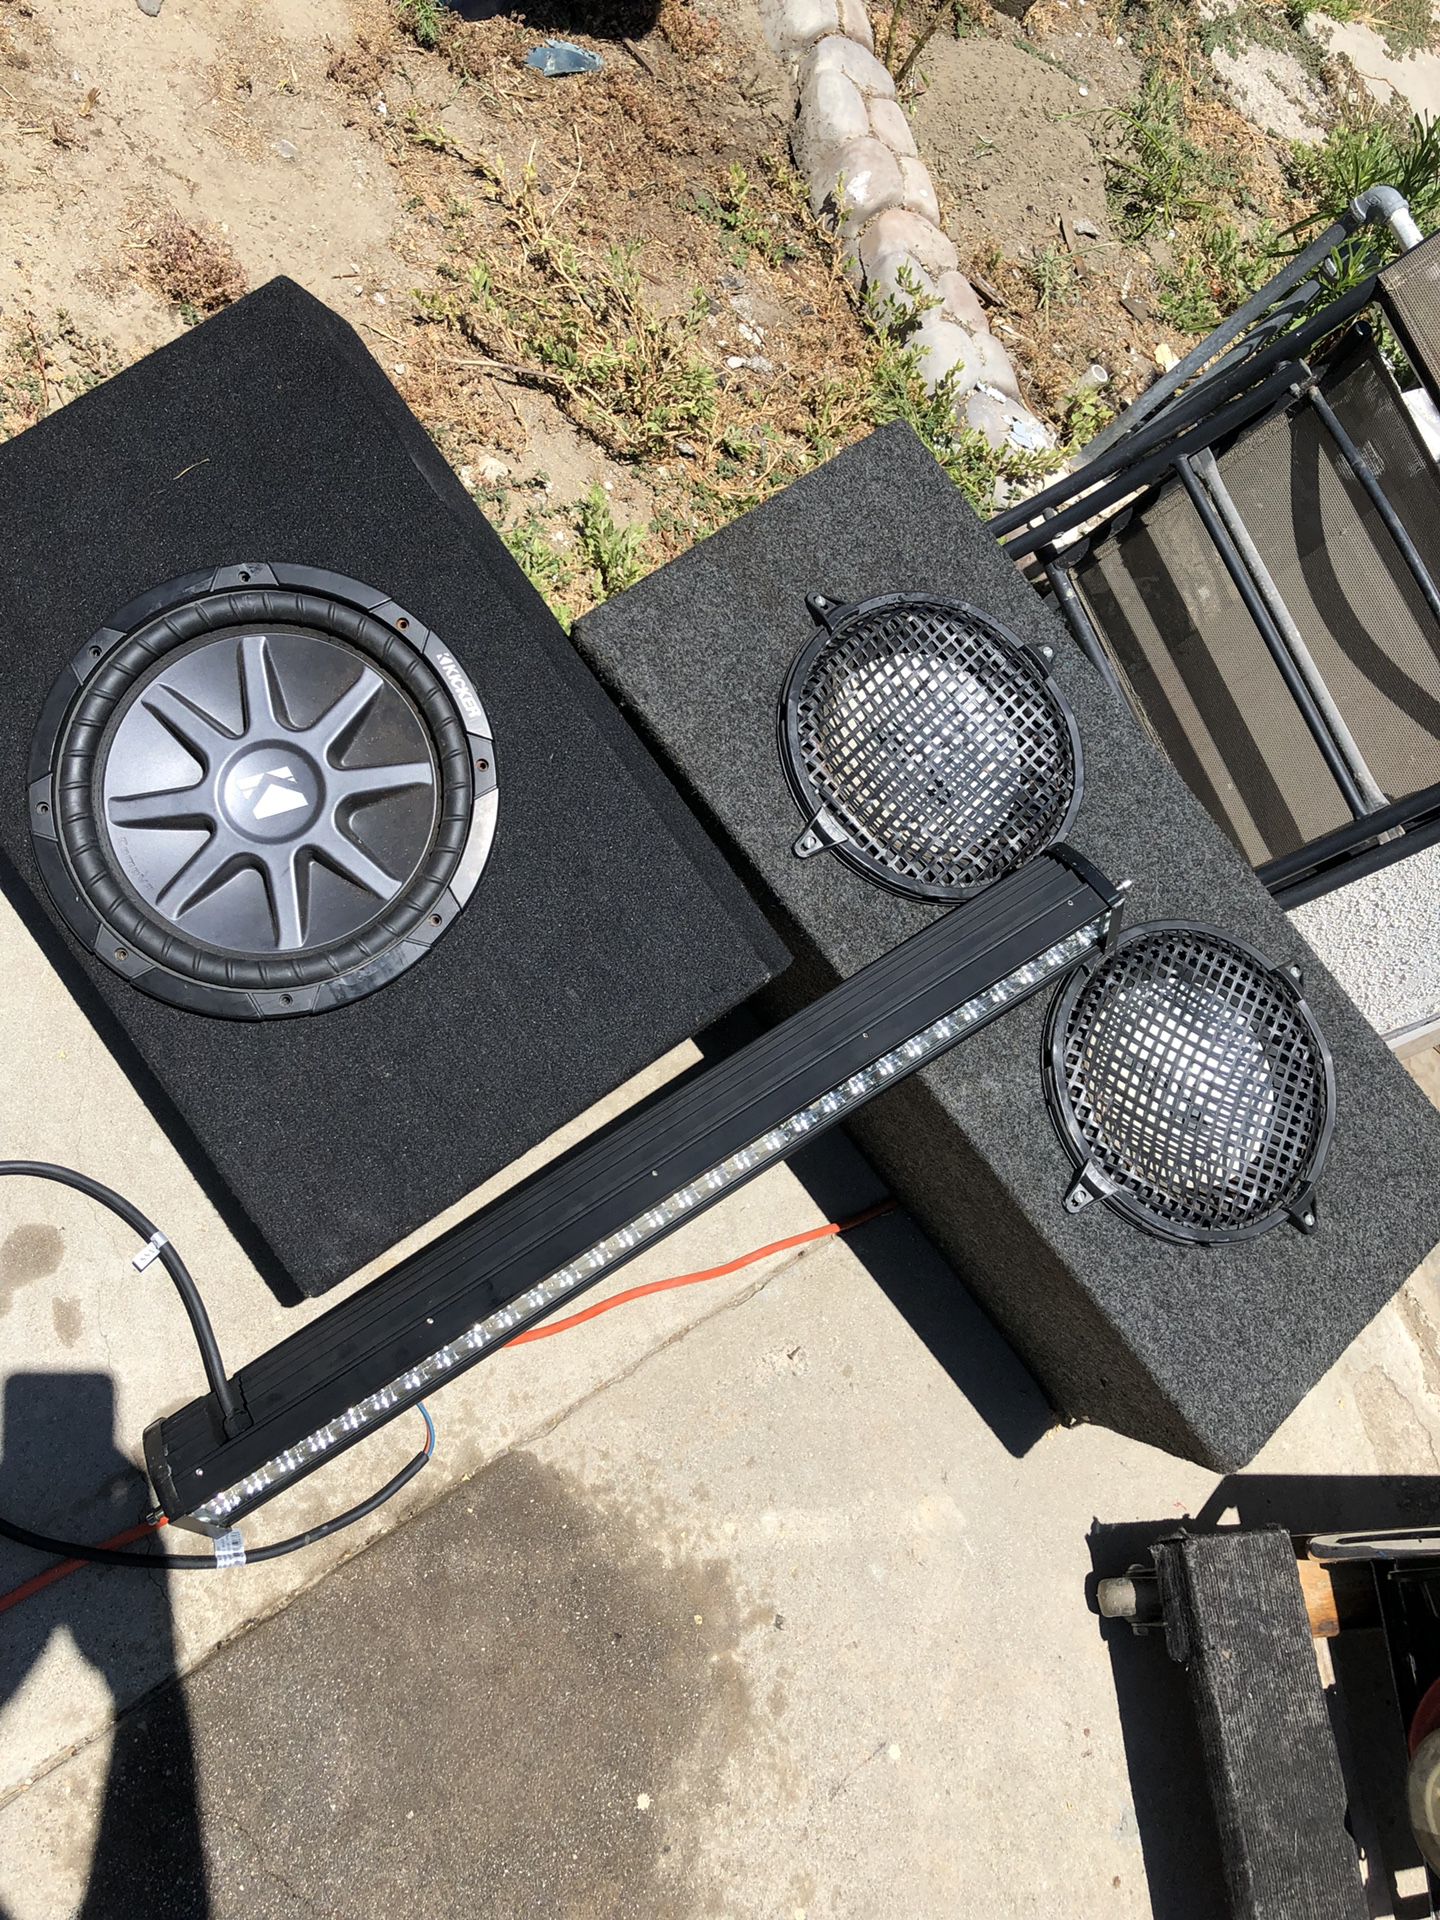 Speakers and light bar